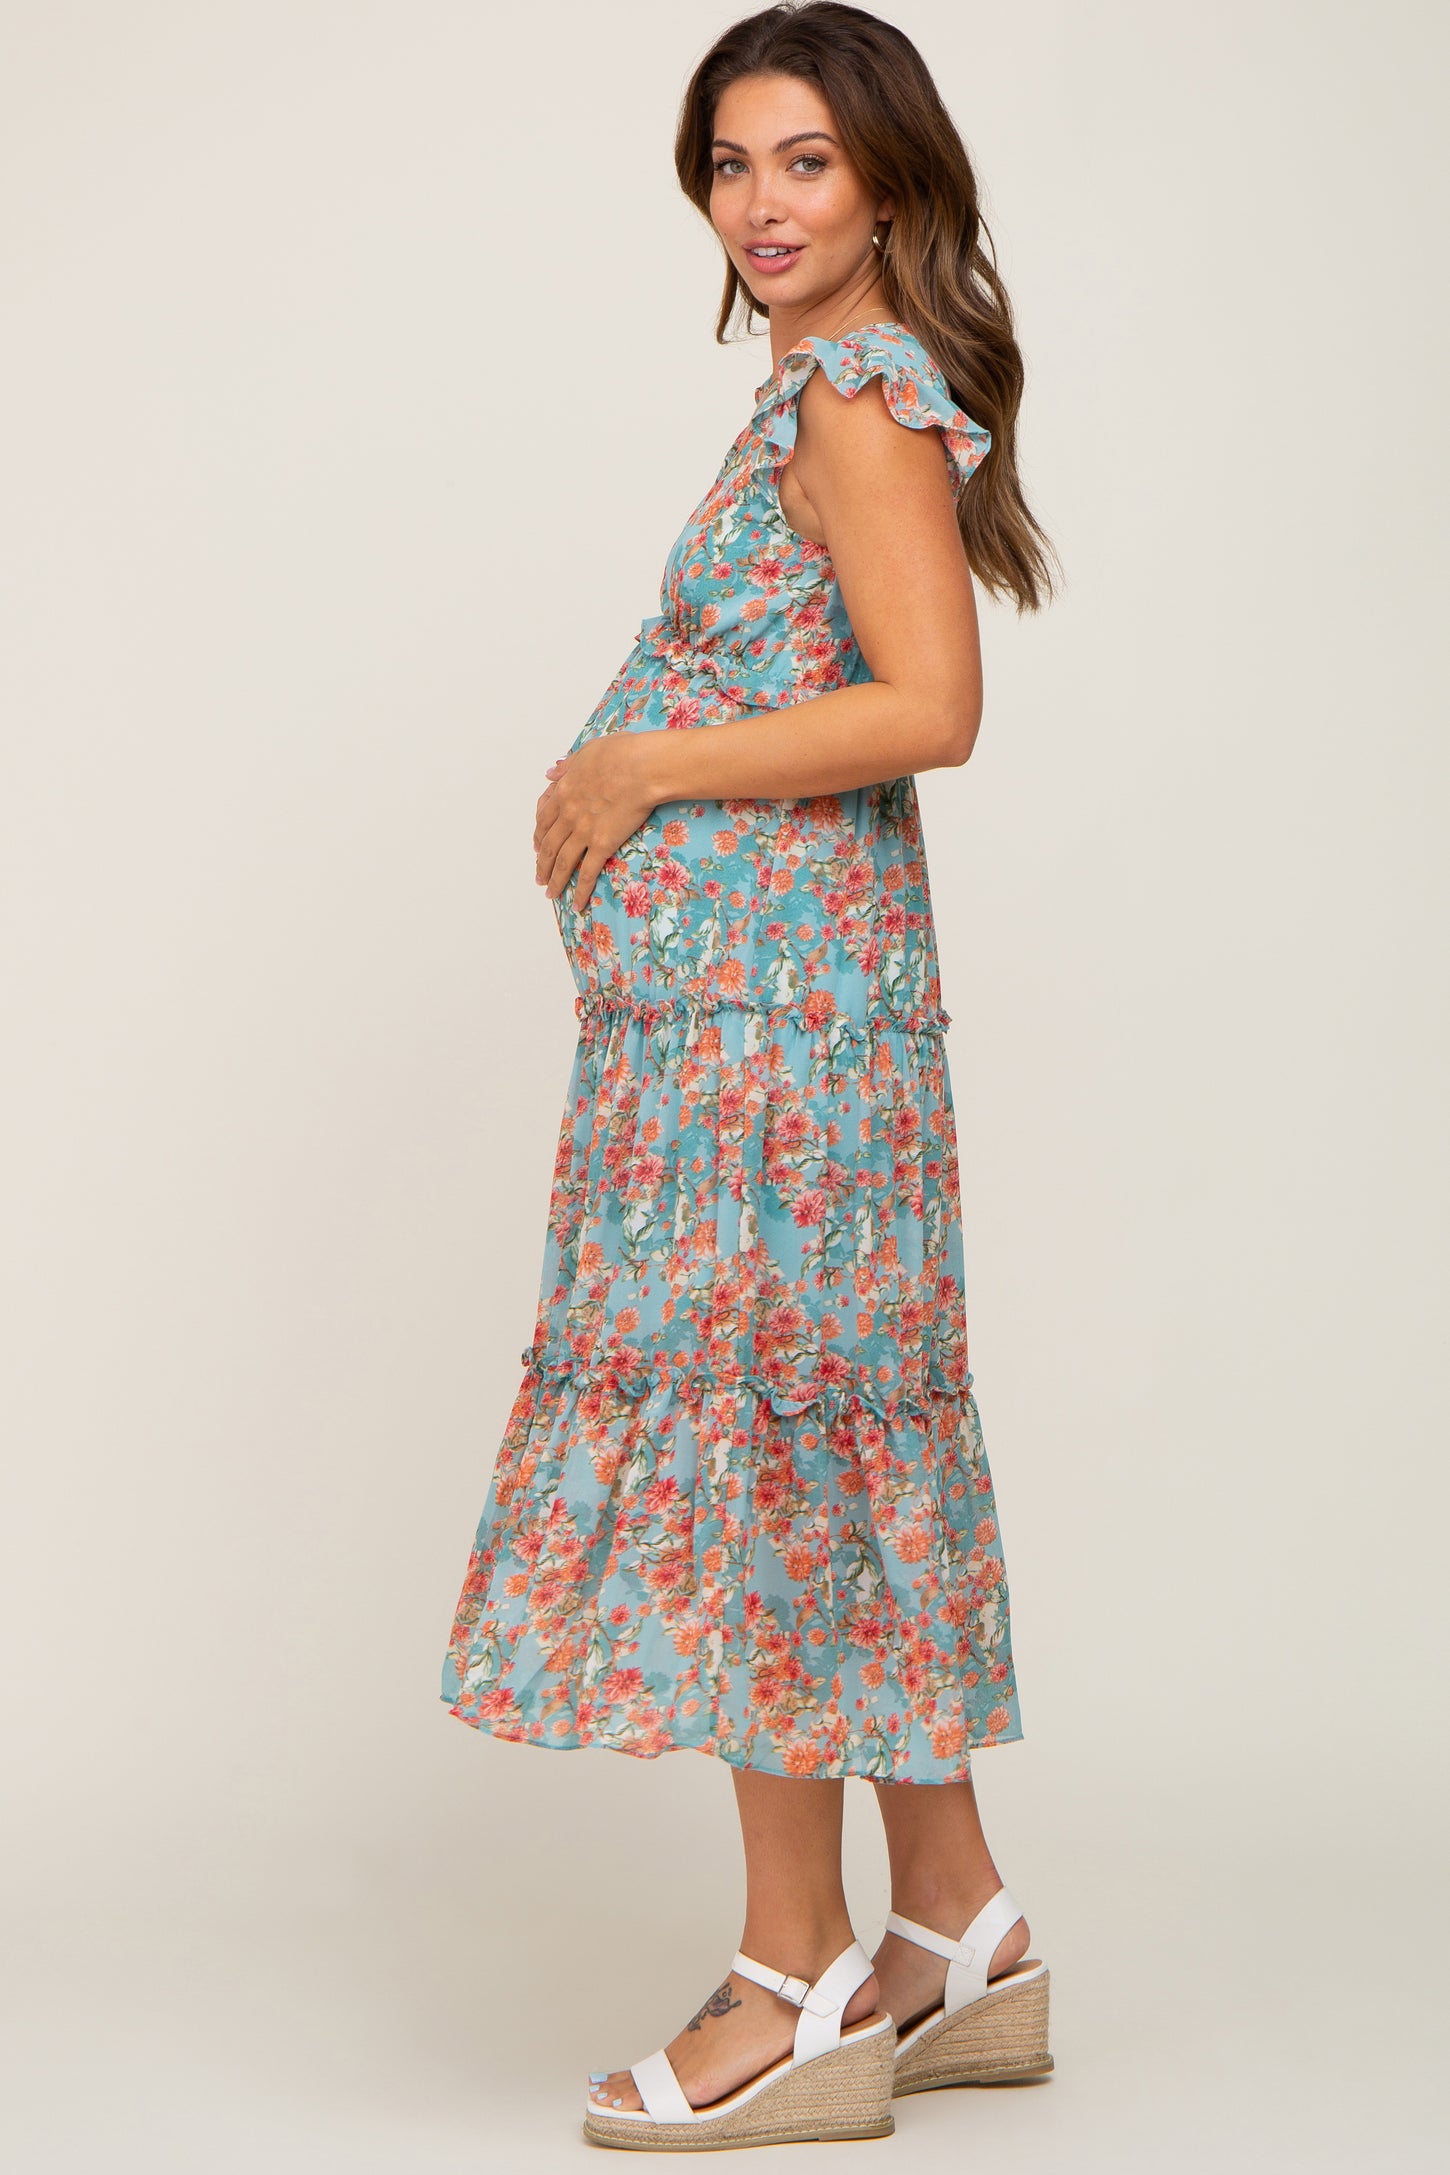 New* Isabel Maternity by Ingrid & Isabel Maternity Over Belly Midi